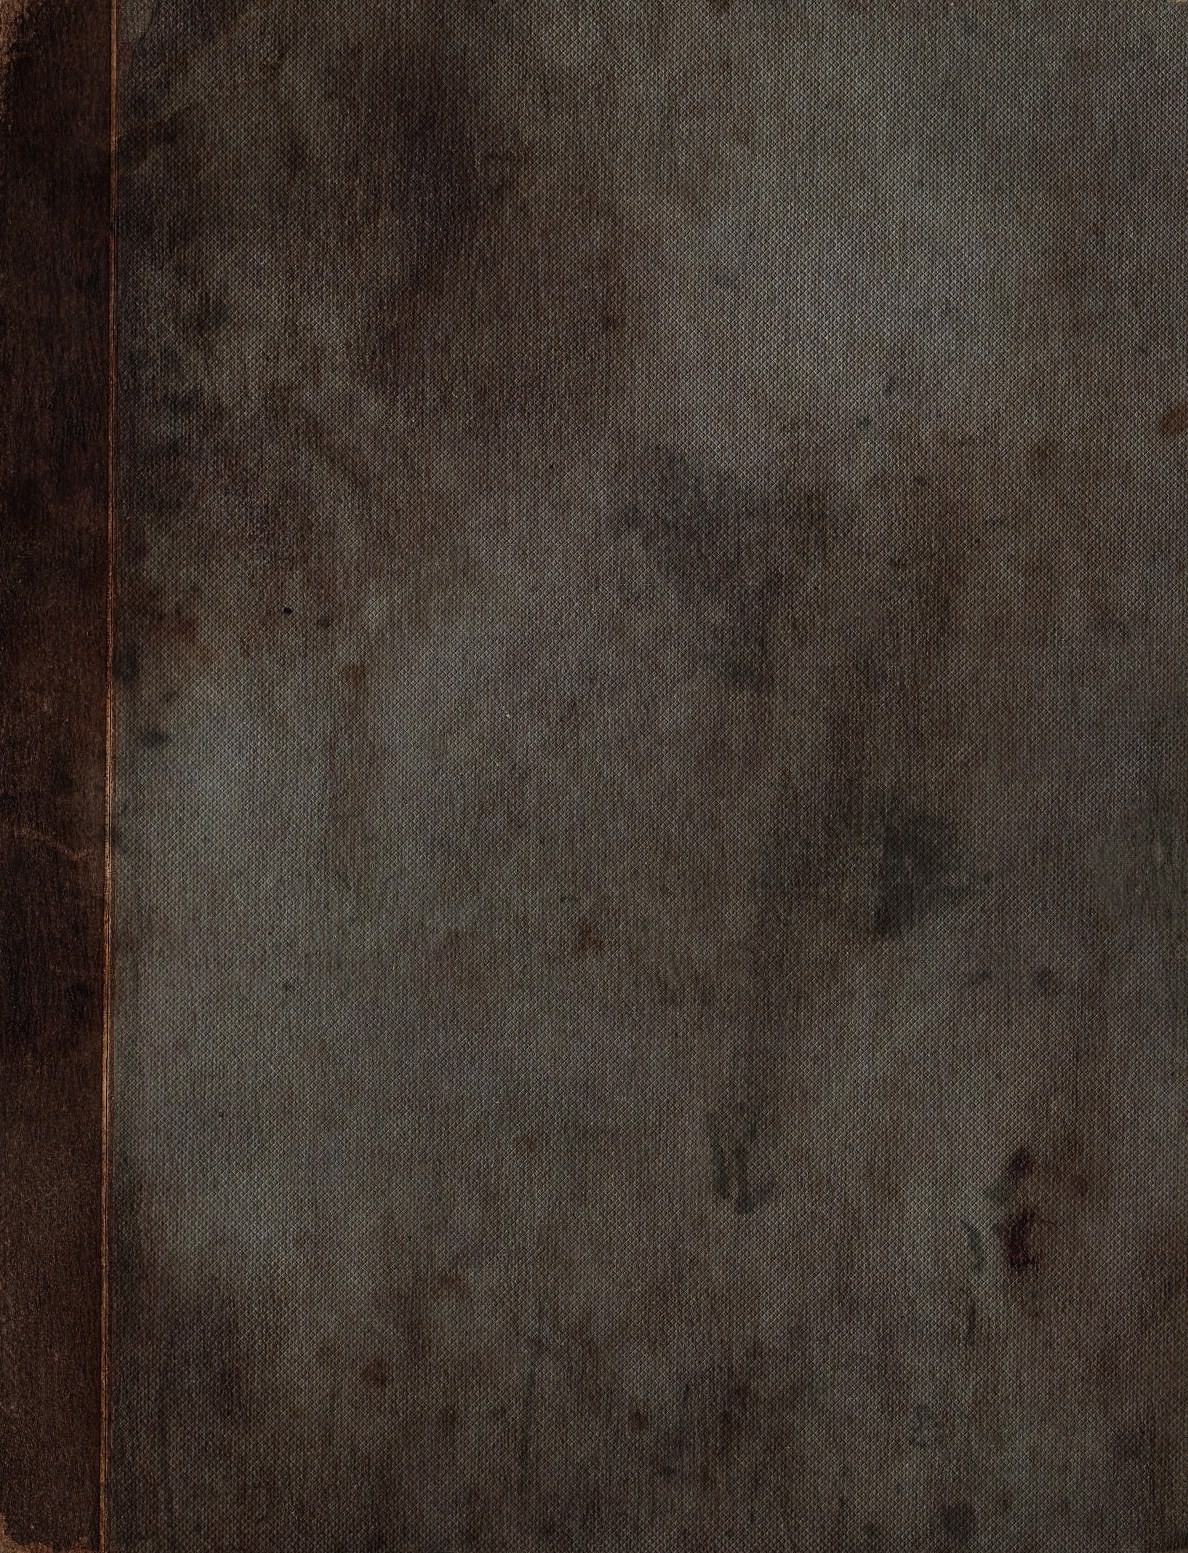 Free Grungy Front Book Cover Texture